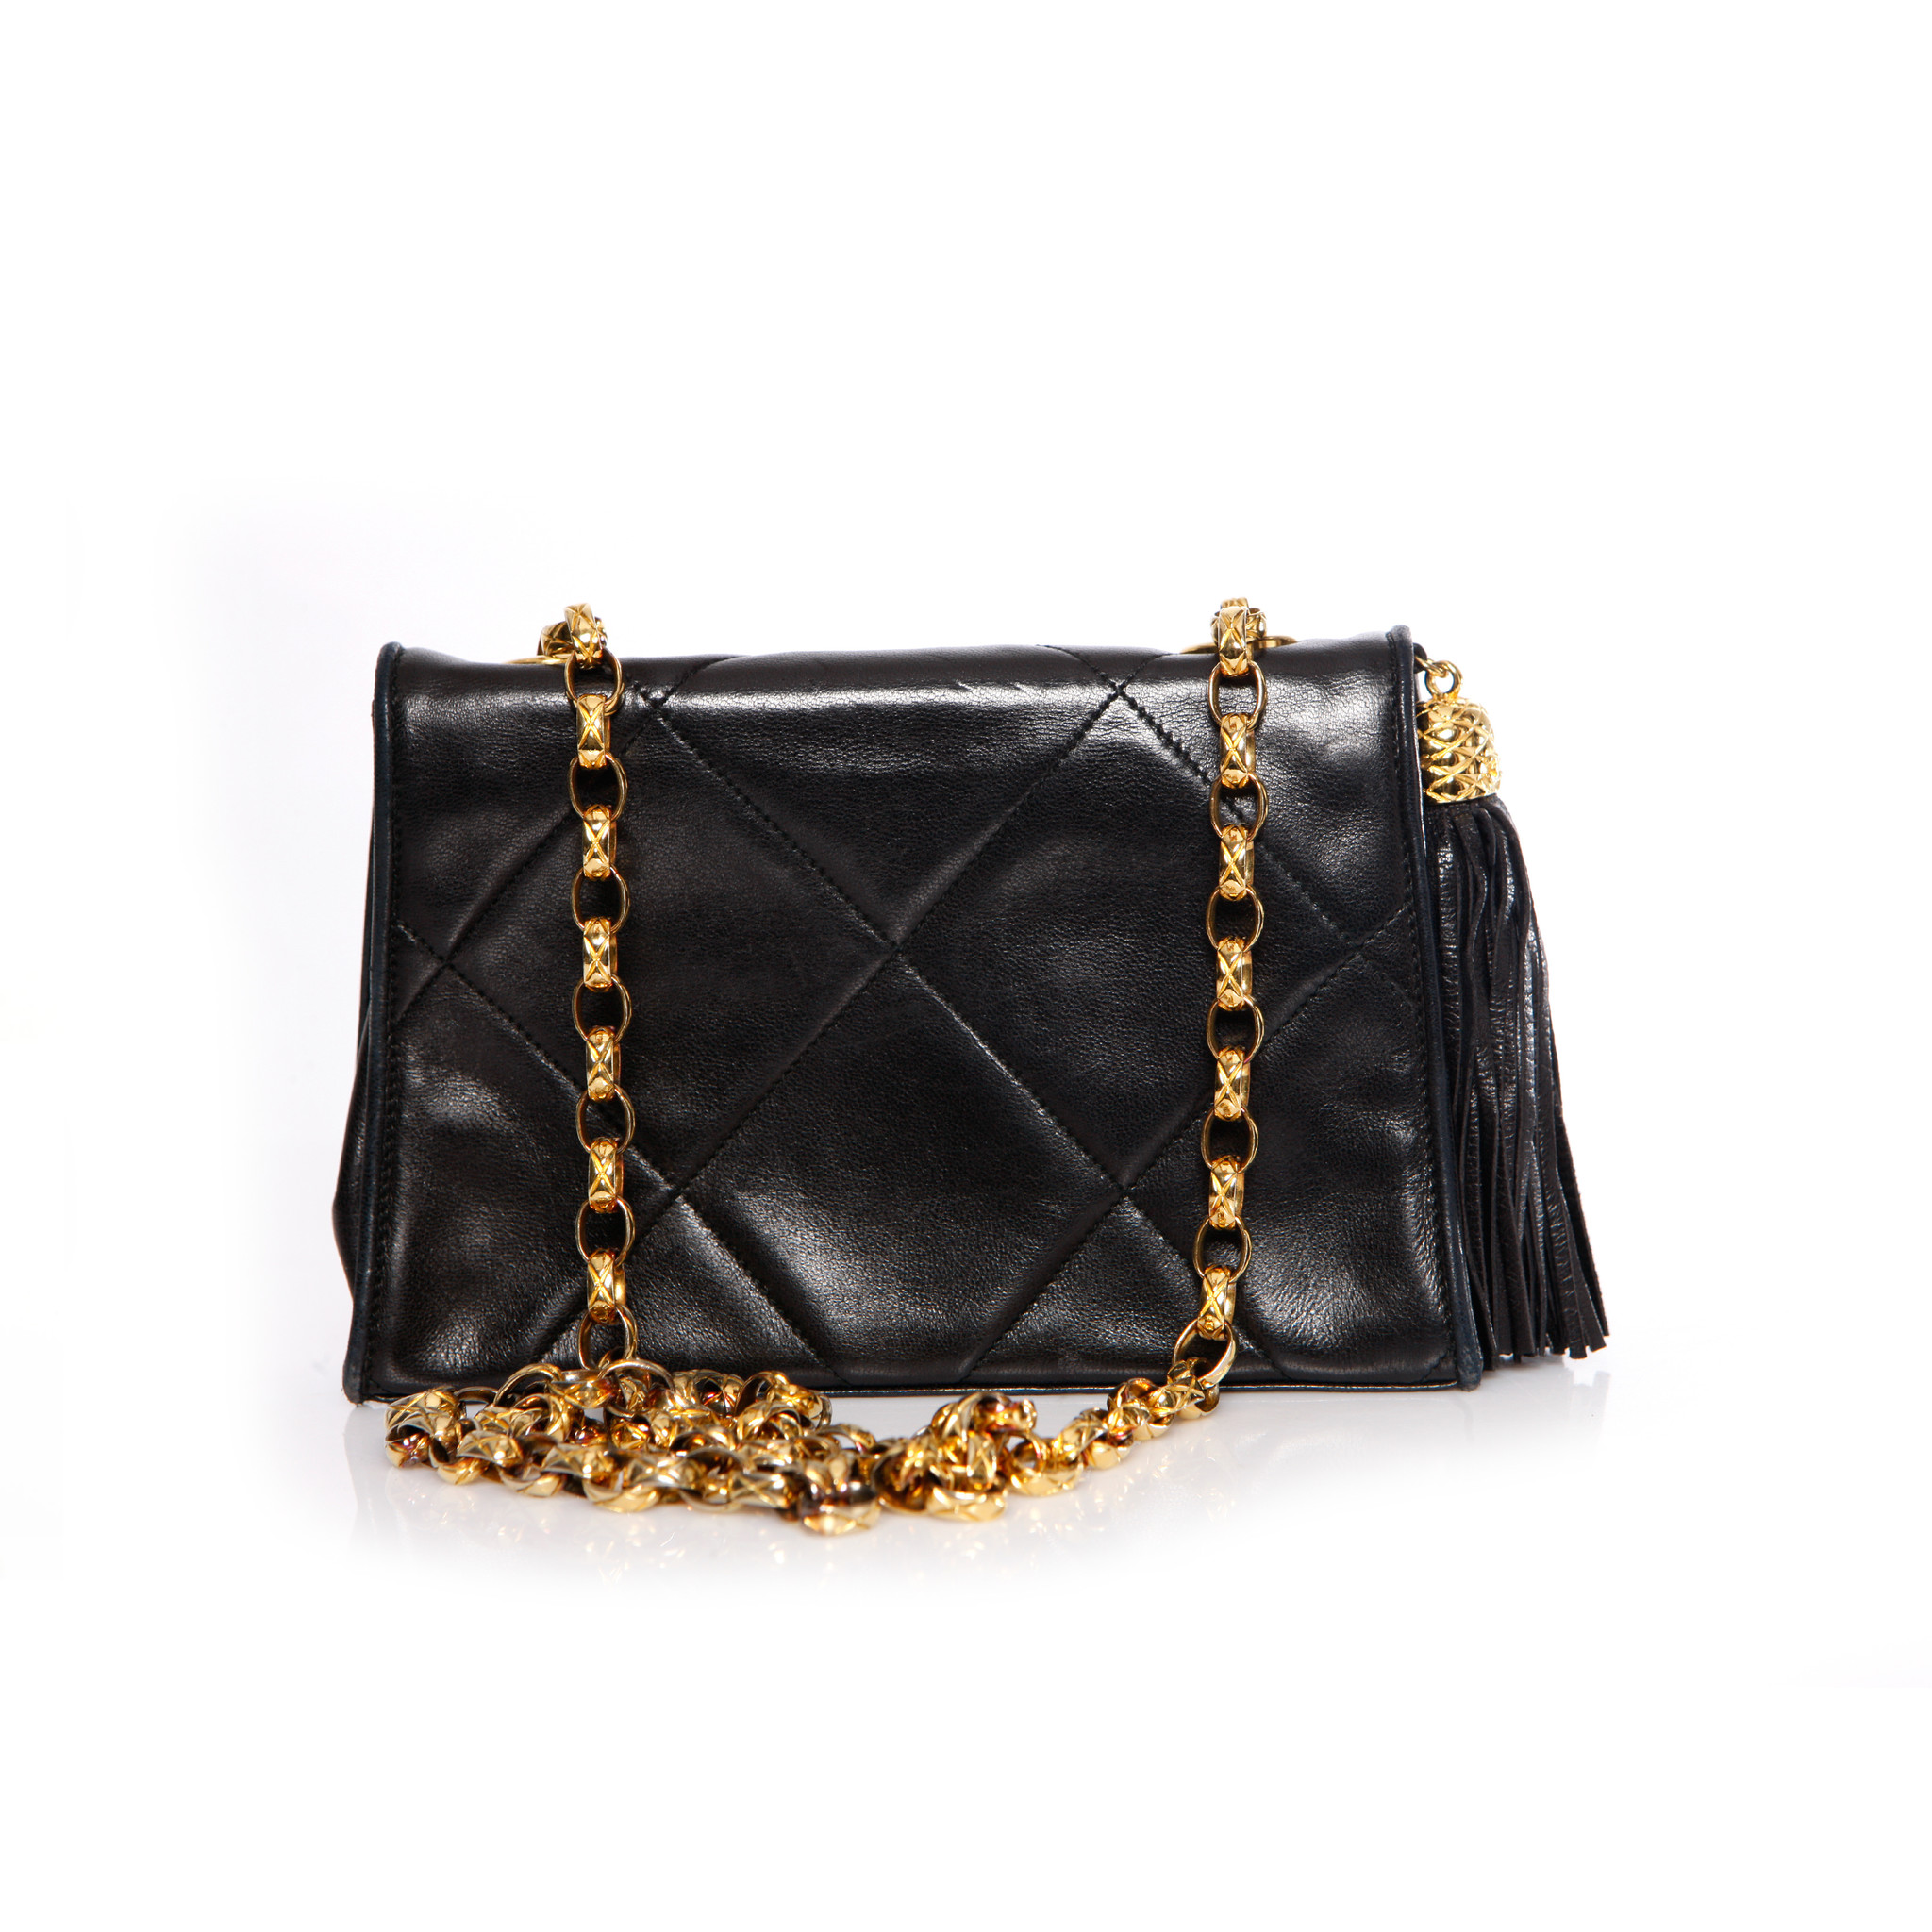 Chanel Vintage Chanel Black Quilted Lambskin Leather Tall Chain